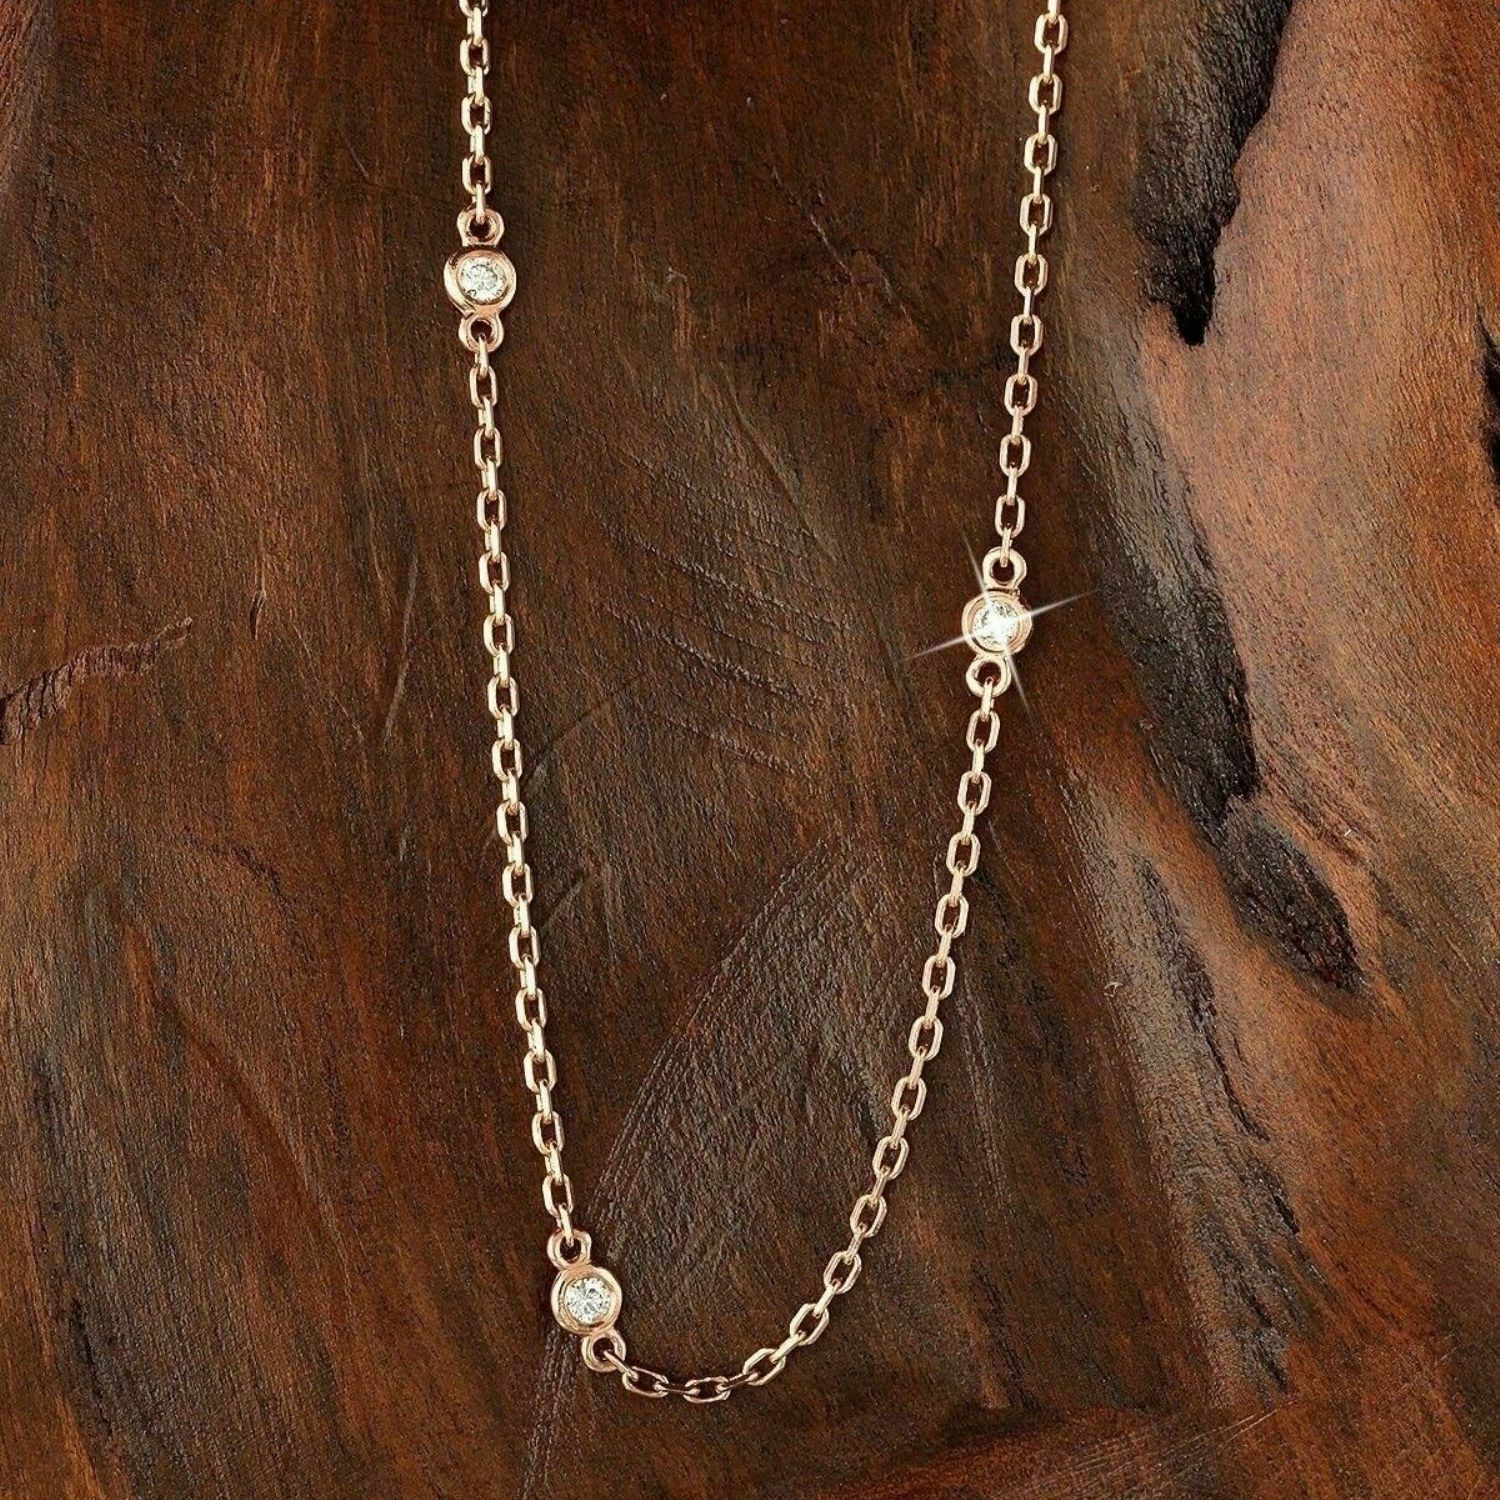 Primary image for White Diamond Alternatives By the Yard Stations Necklace 14k Rose Gold Over 925